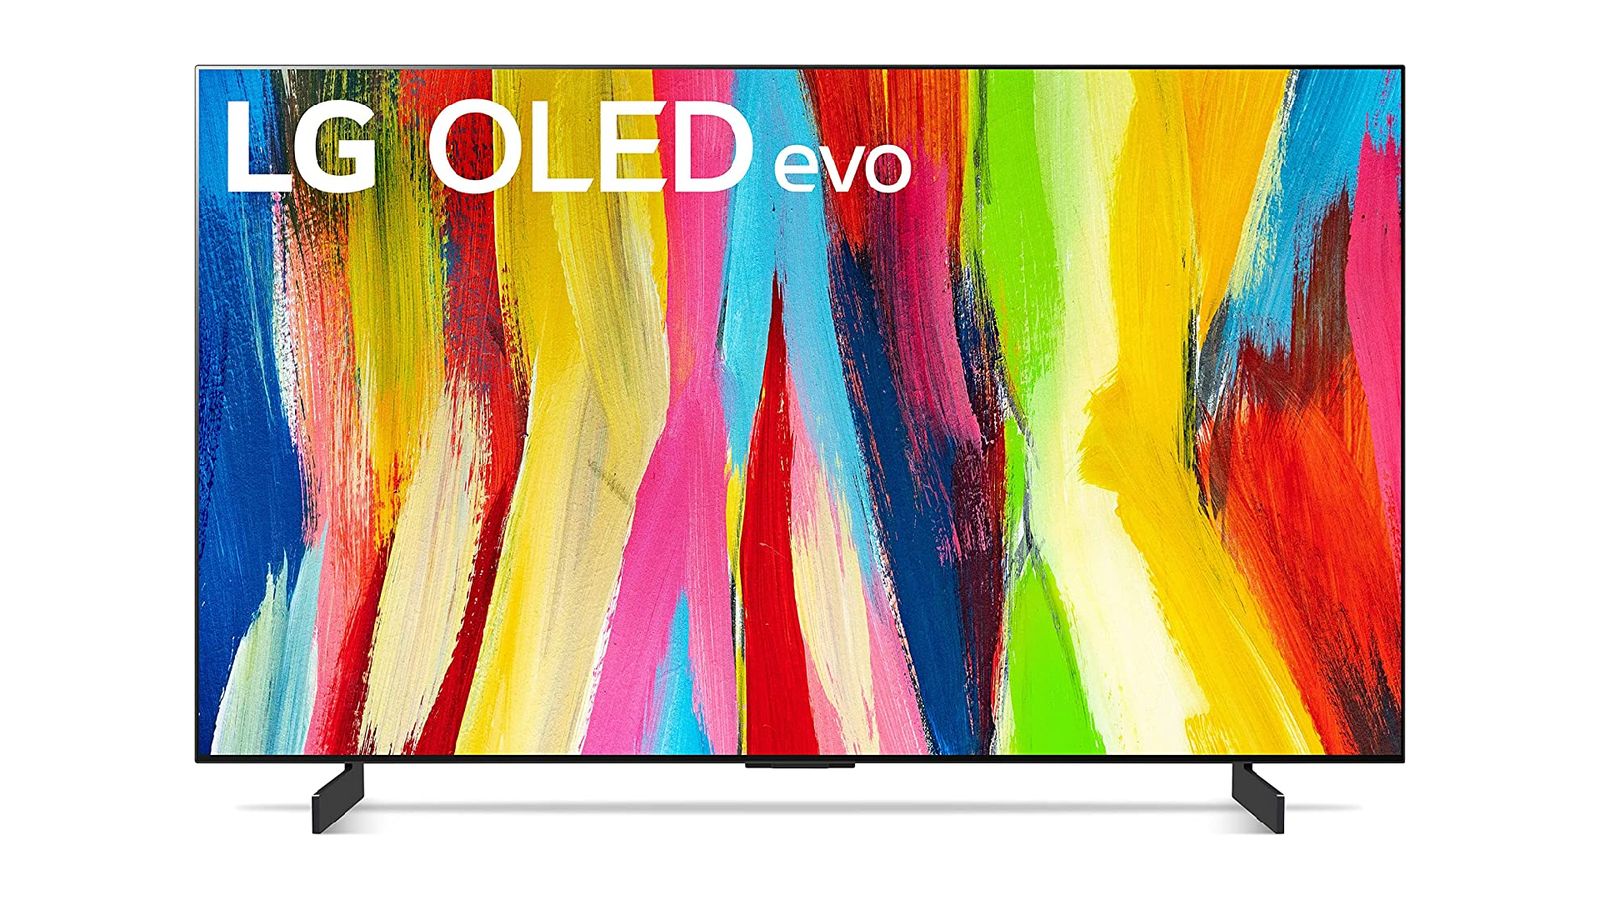 Best OLED TV - LG C2 product image of a flat TV with multi-coloured paint stripes on the display.